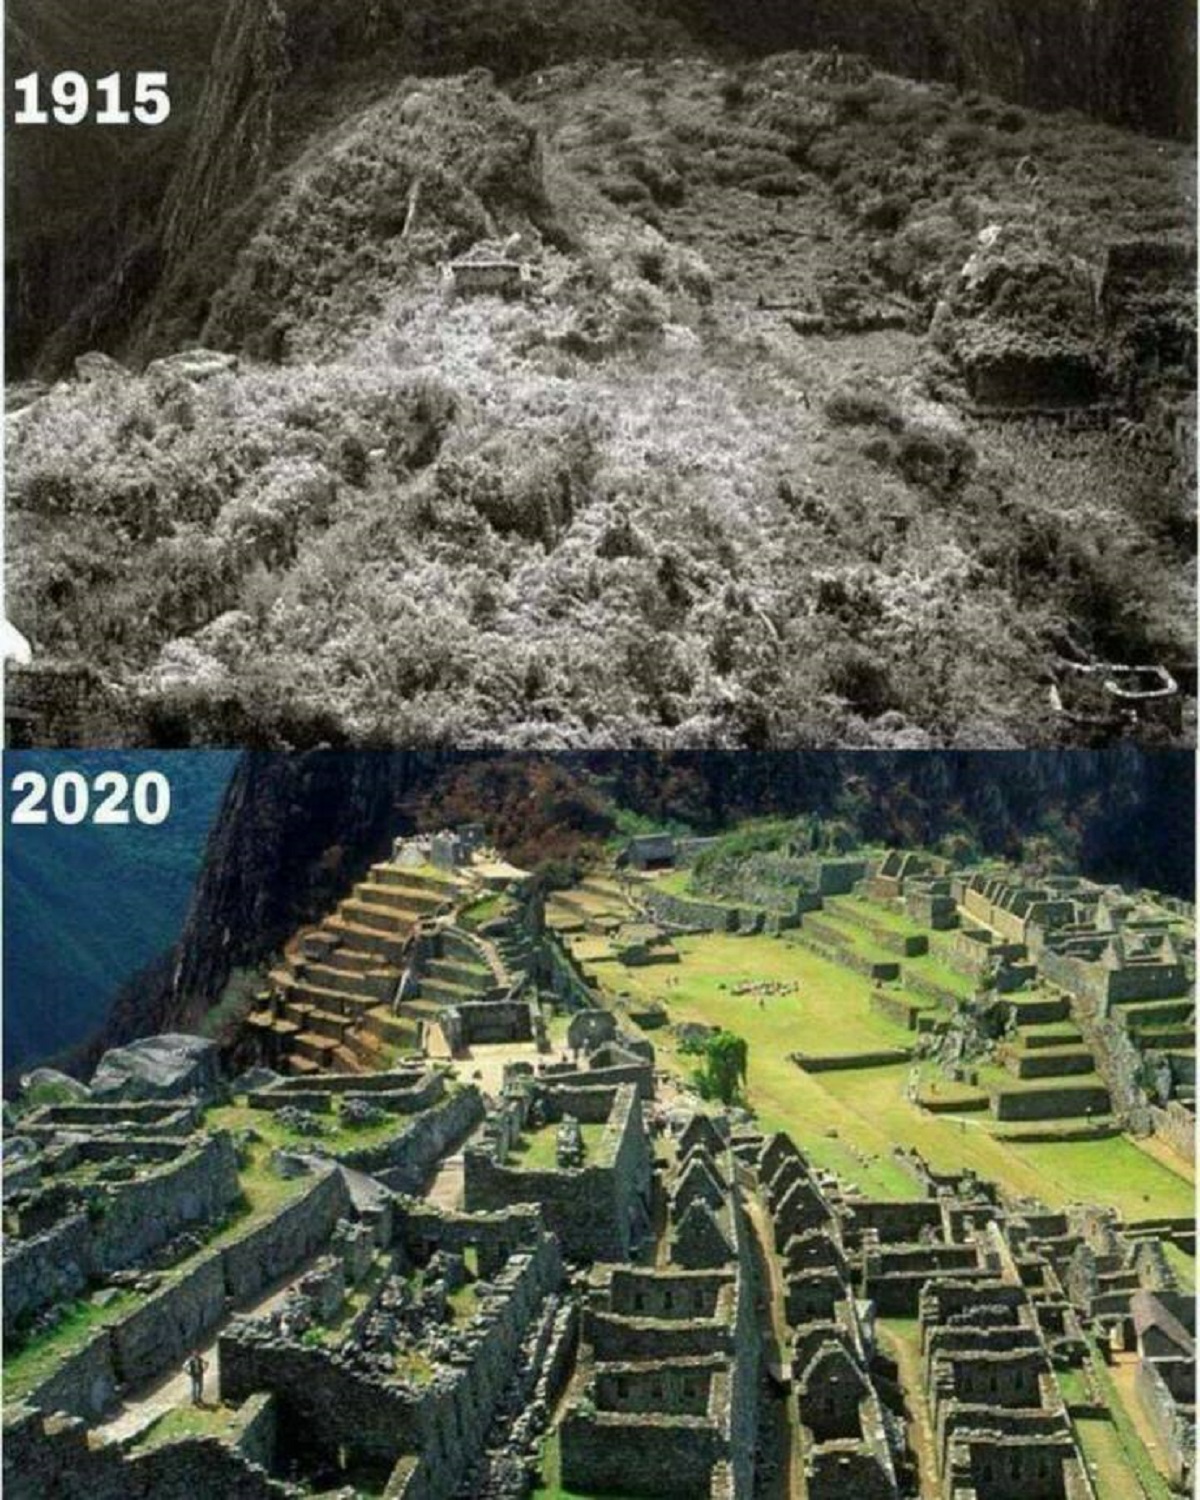 machu picchu then and now - 1915 2020